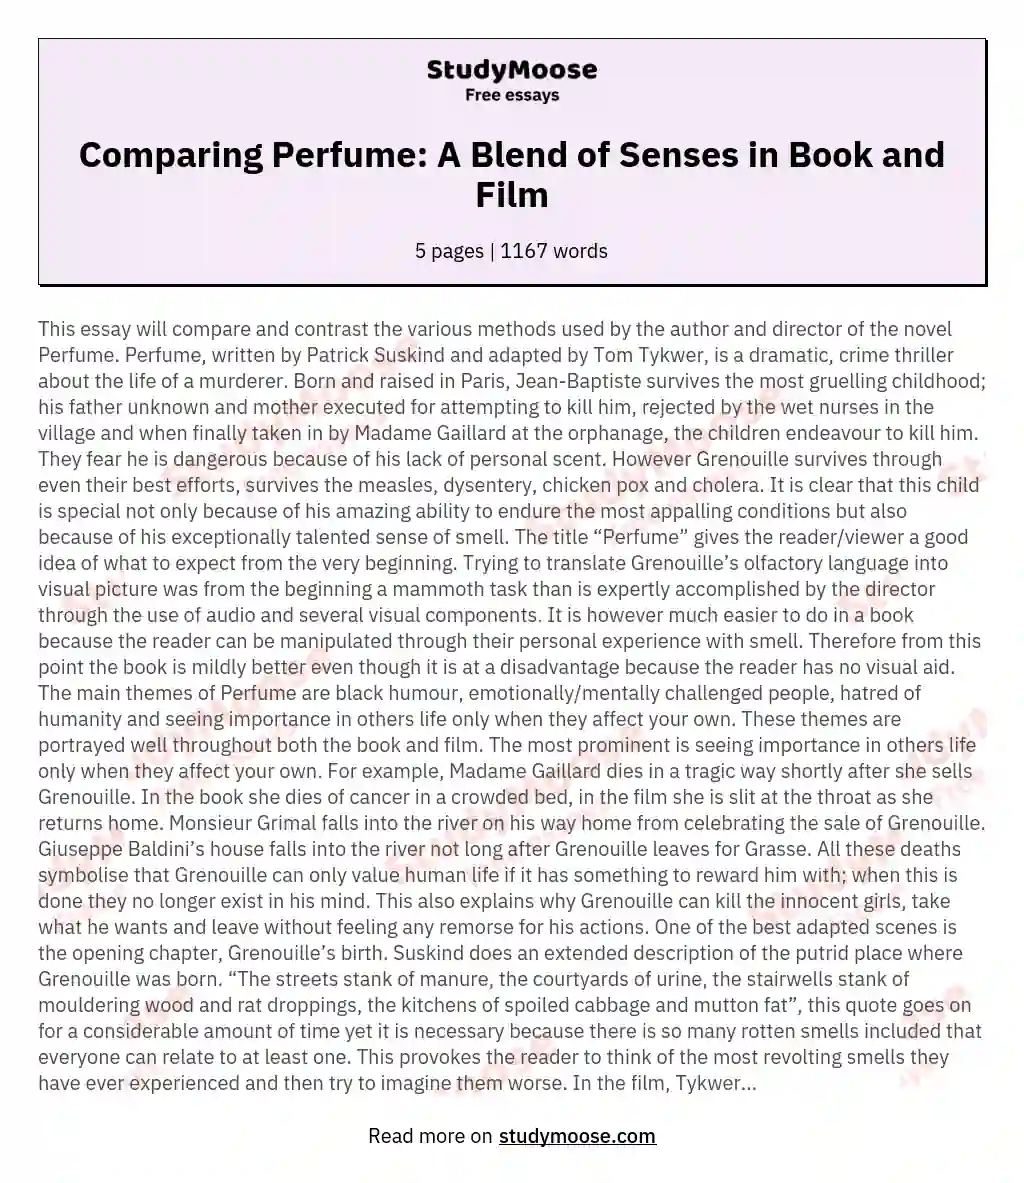 Comparing Perfume: A Blend of Senses in Book and Film essay